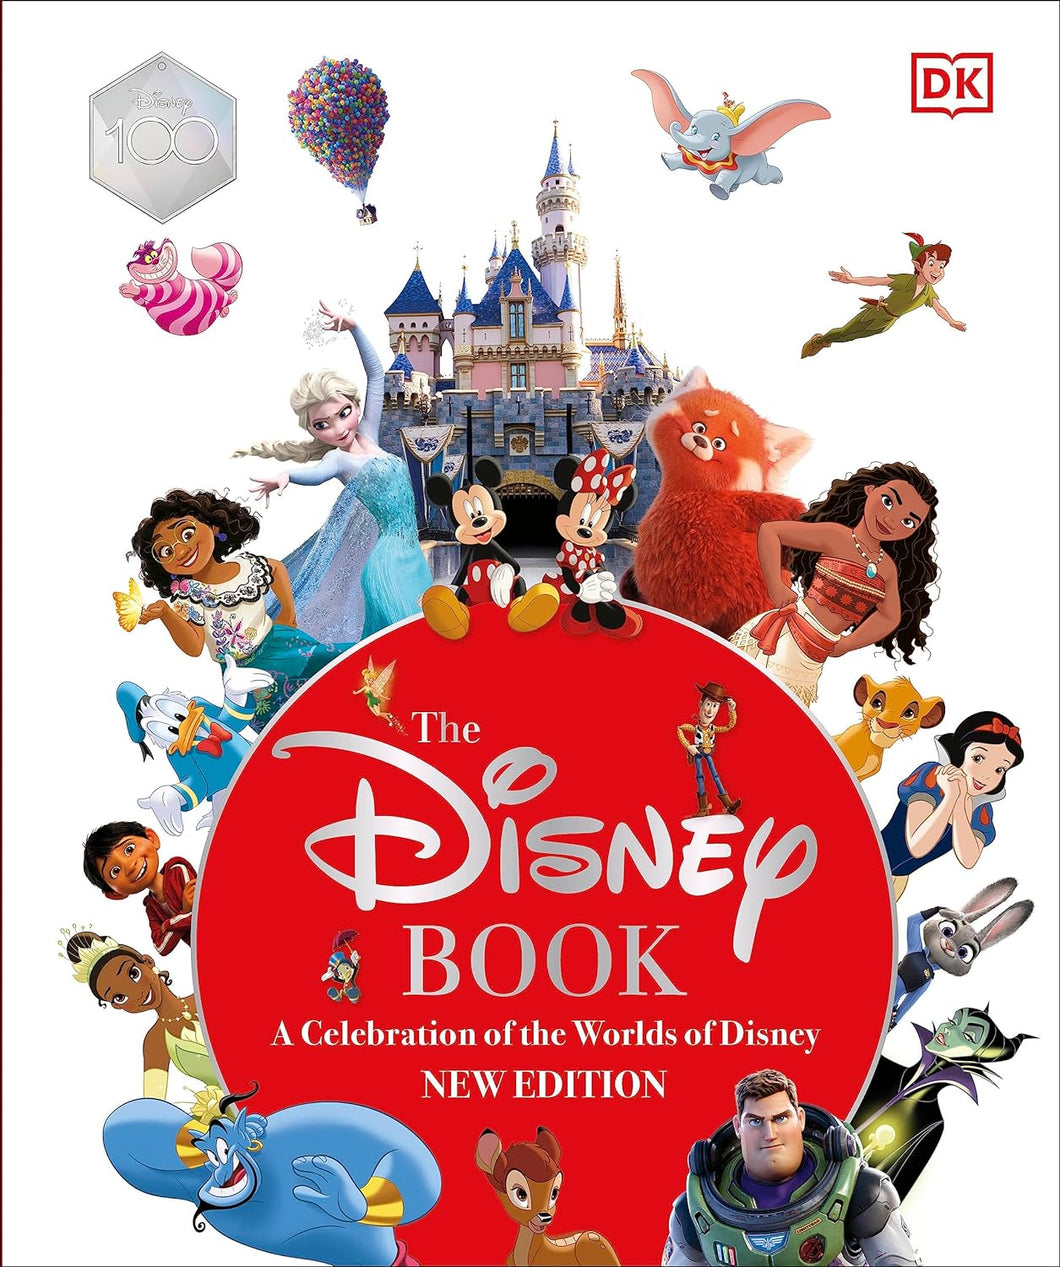 The Disney Book - A Celebration of the World of Disney New Edition (Hardcover)